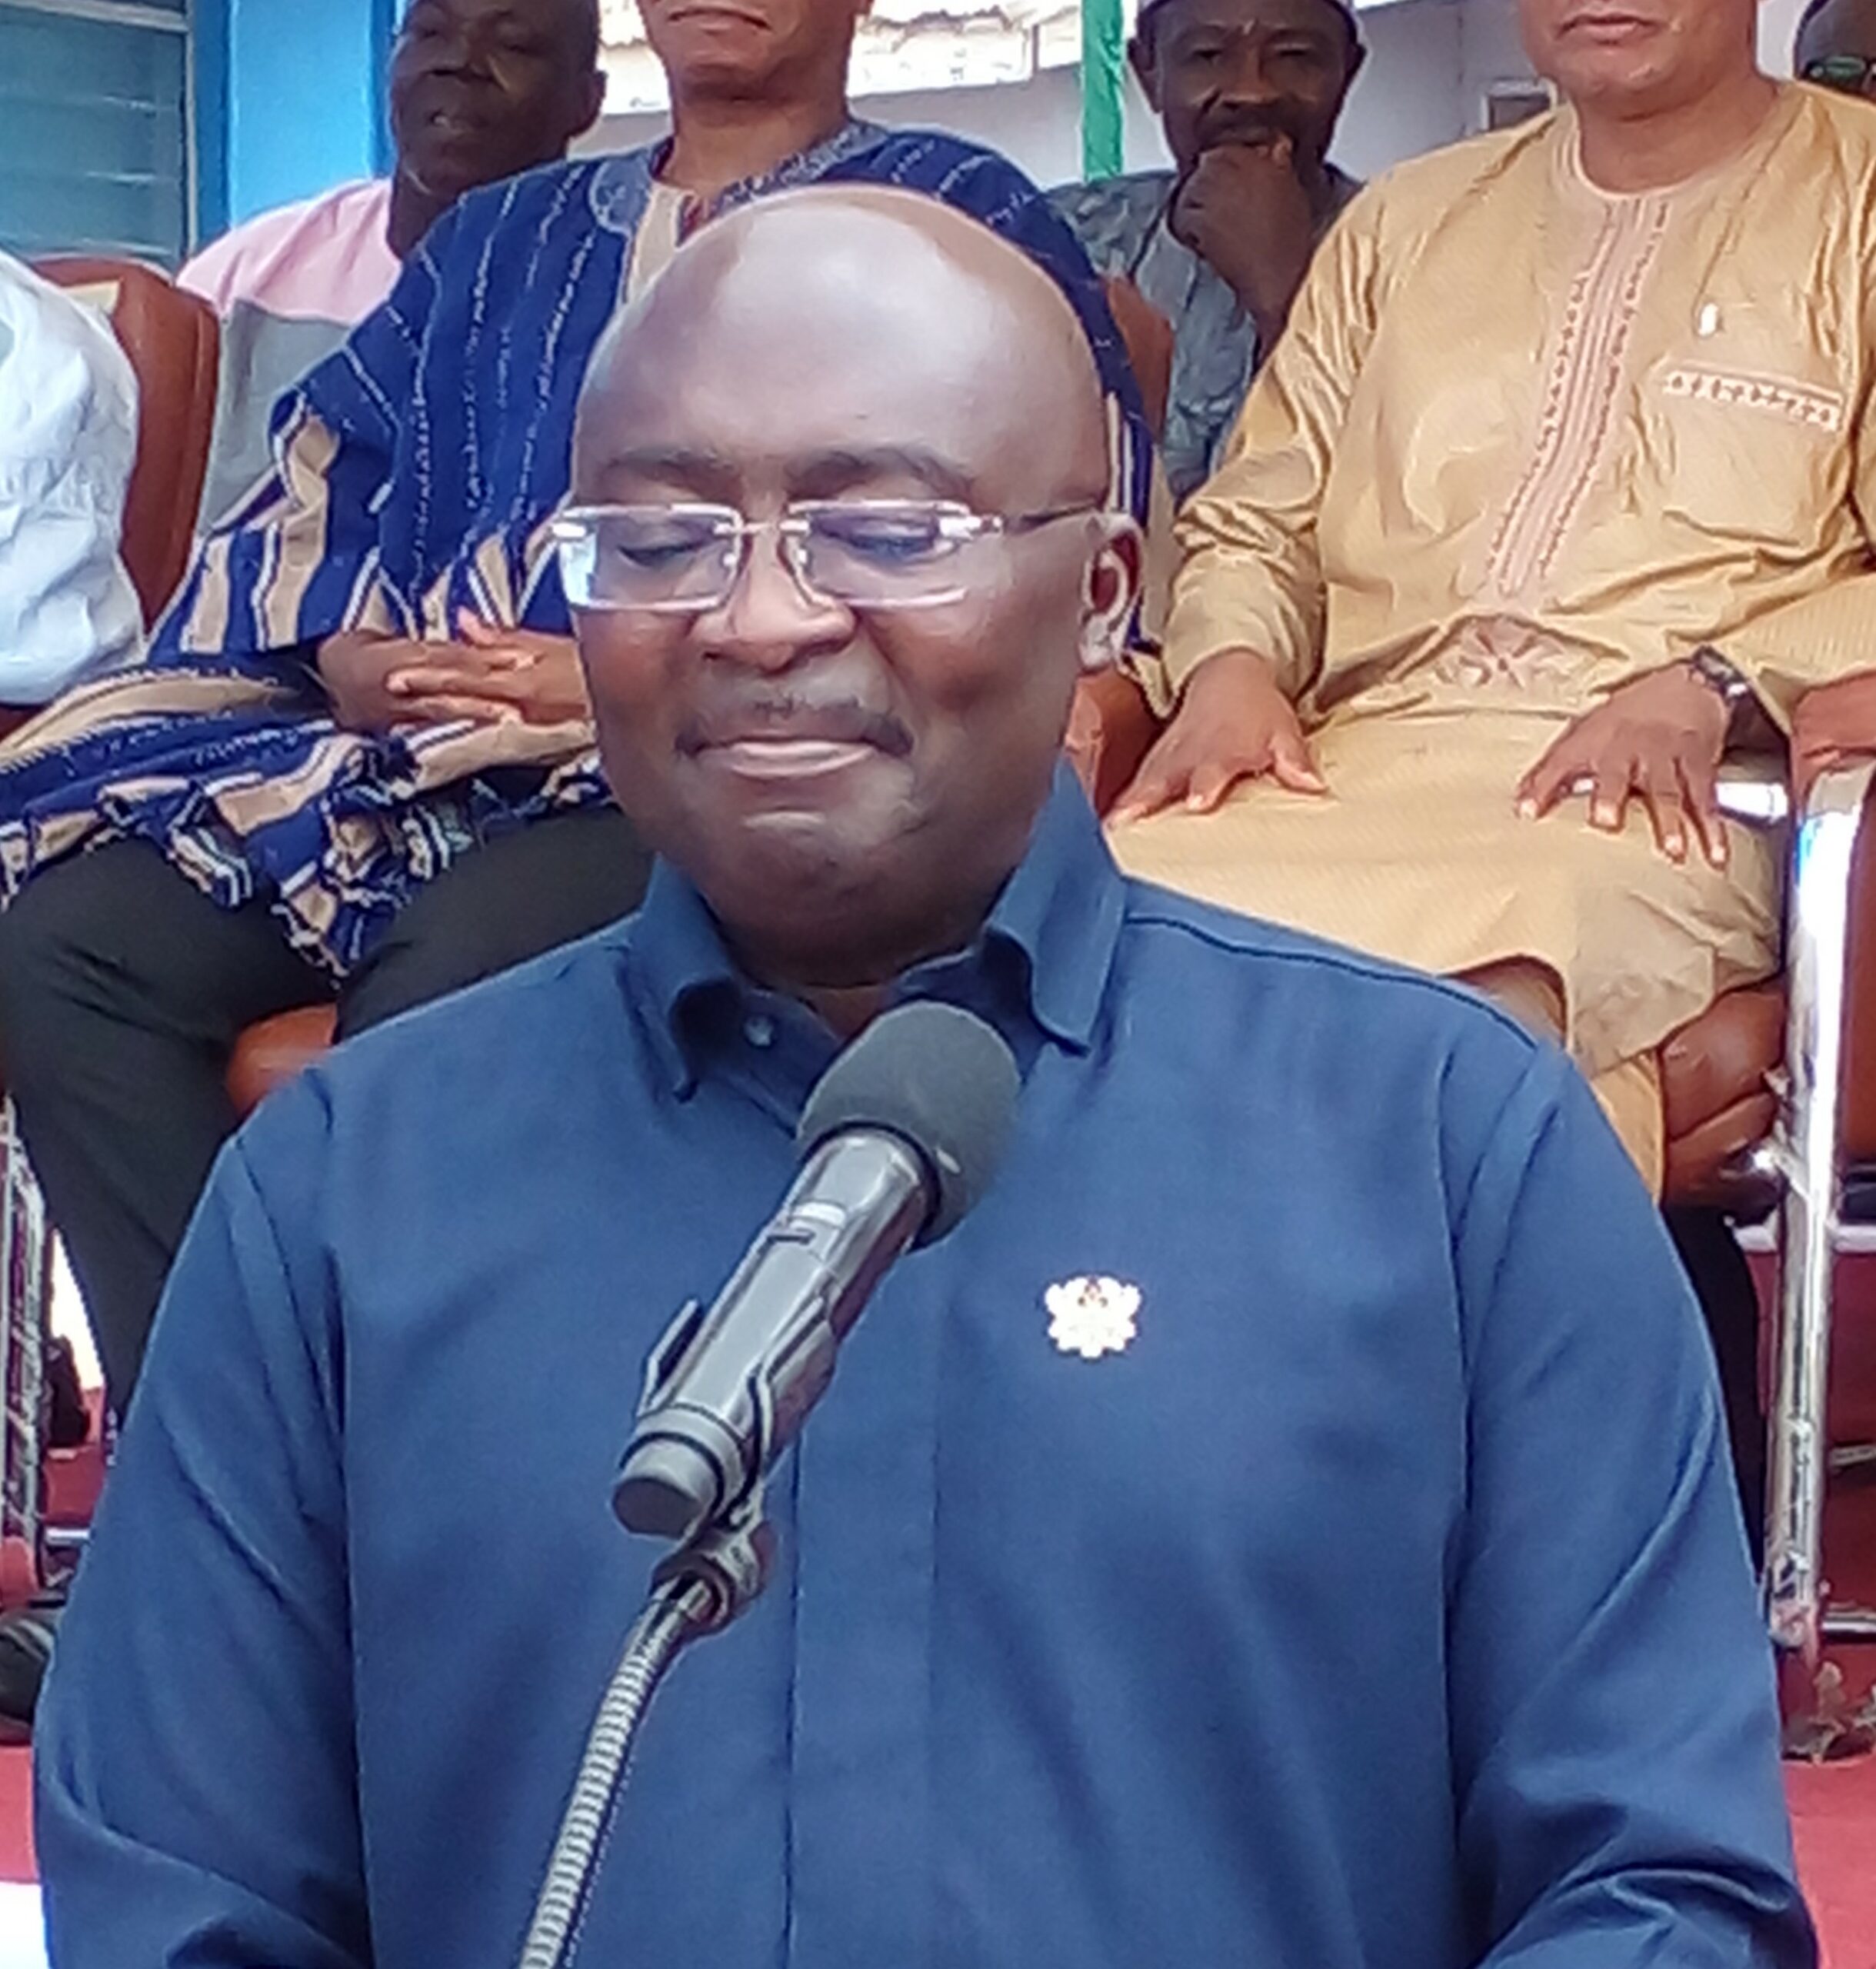 Minority criticizes Bawumia’s vision, saying he can’t absolve himself from government’s policies   